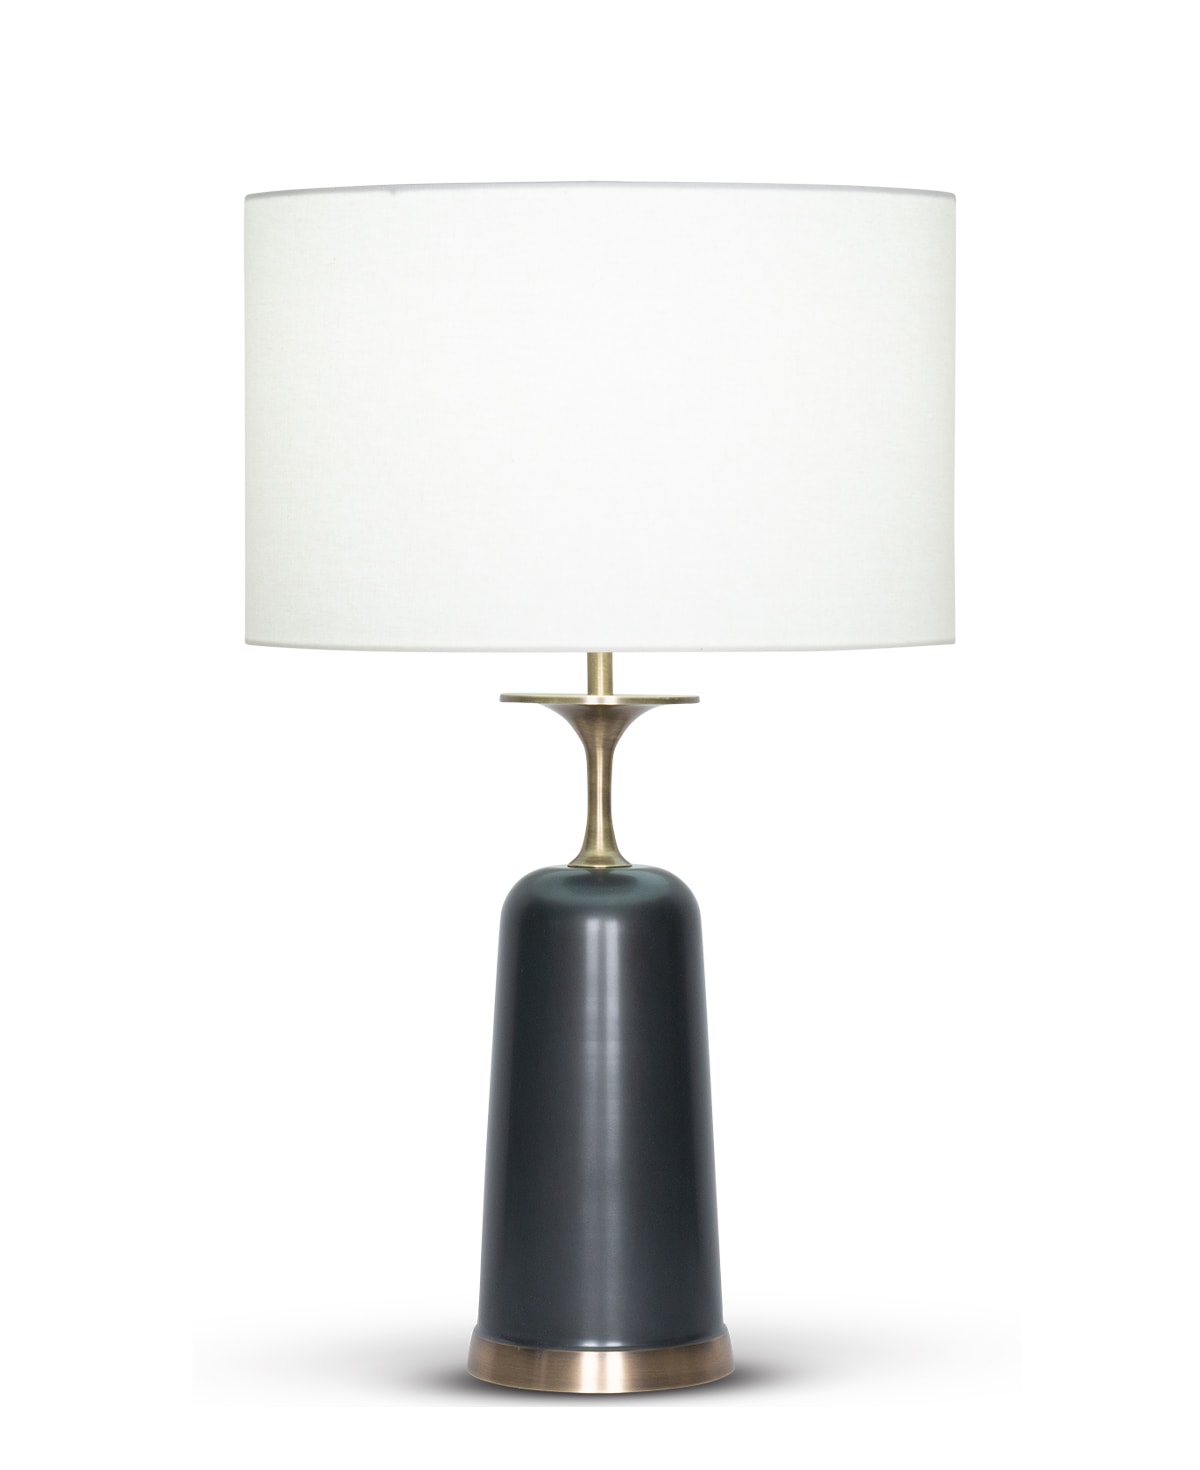 FlowDecor Fletcher Table Lamp in metal with antique brass & bronze finishes and off-white linen drum shade (# 4552)